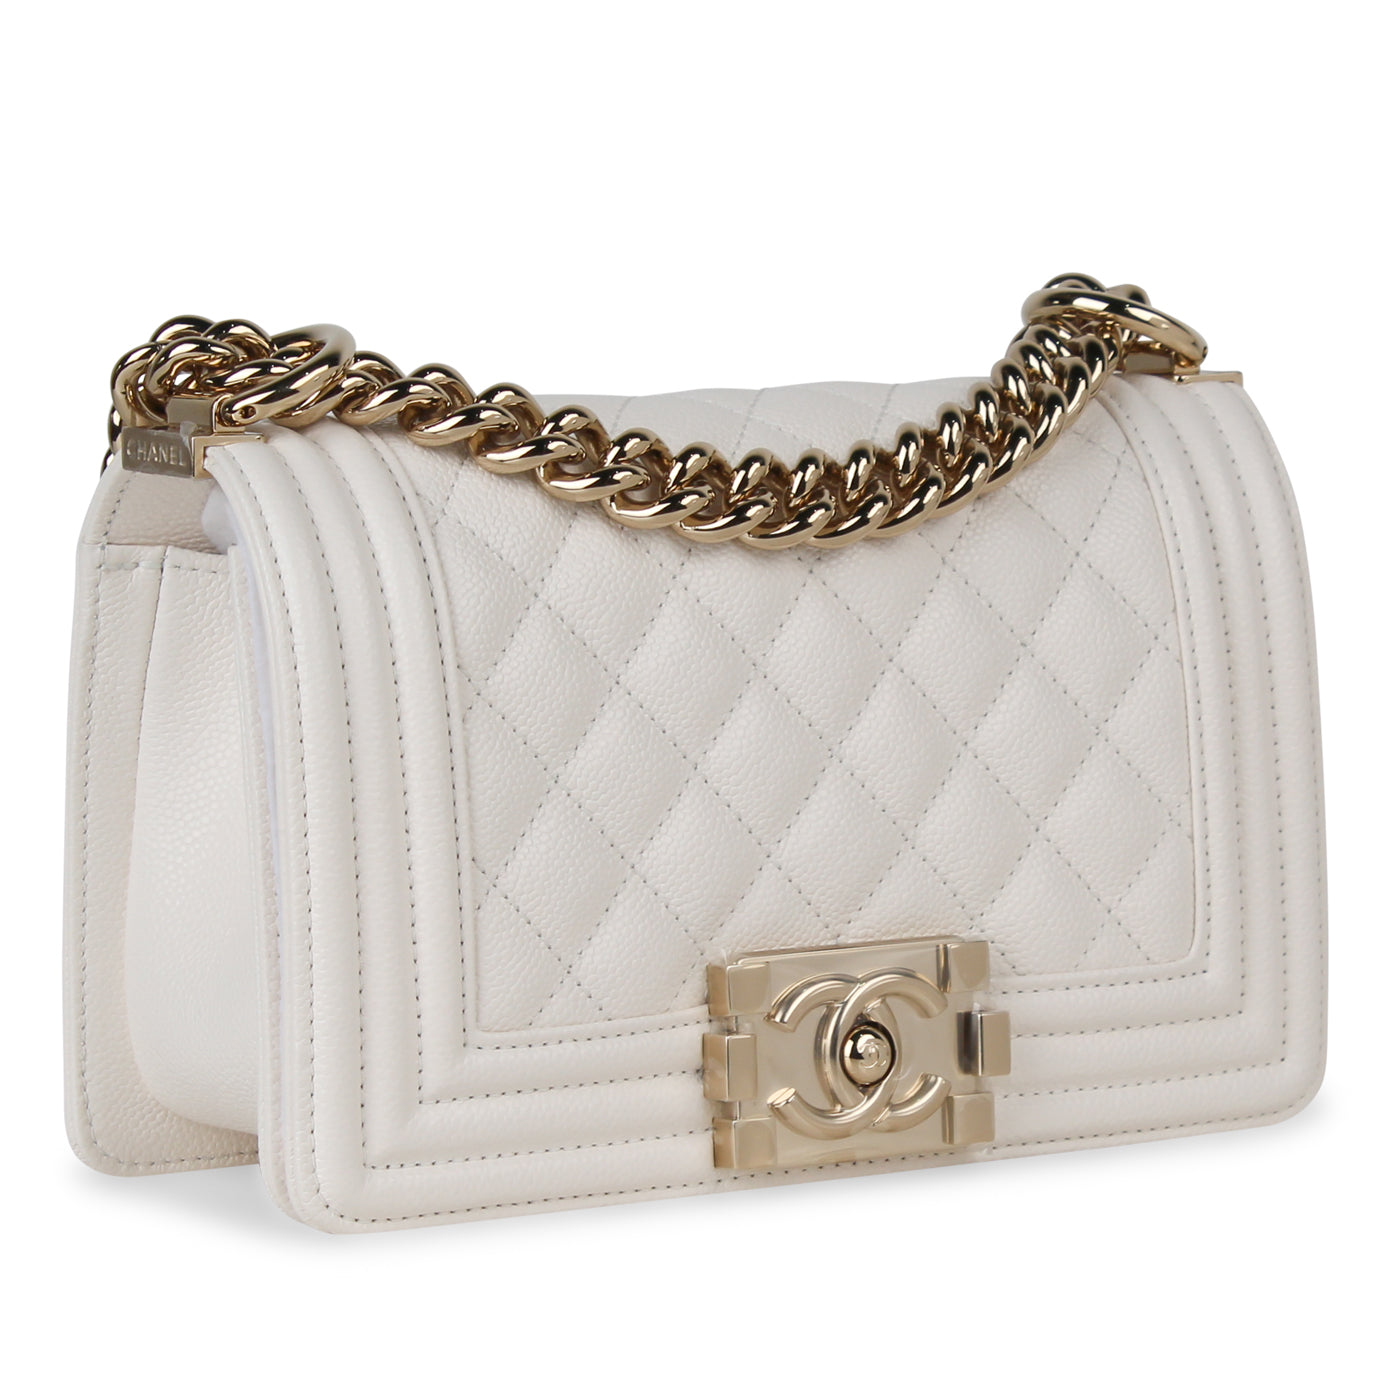 HOT White Chanel Bag Styles to Rock Now 10 styles